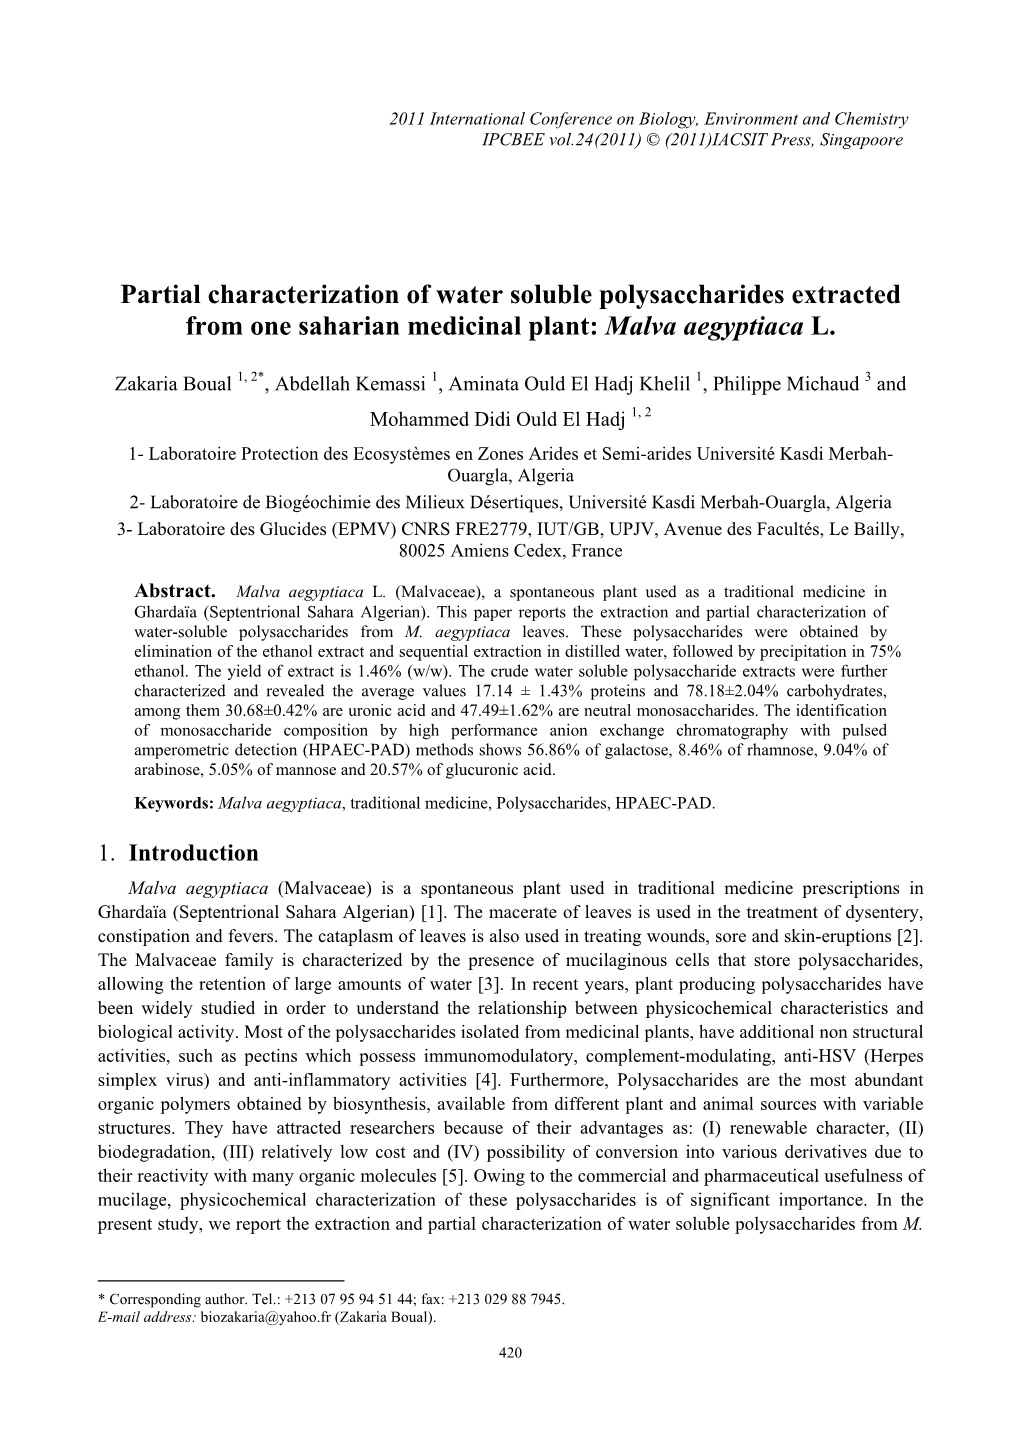 Partial Characterization of Water Soluble Polysaccharides Extracted from One Saharian Medicinal Plant: Malva Aegyptiaca L